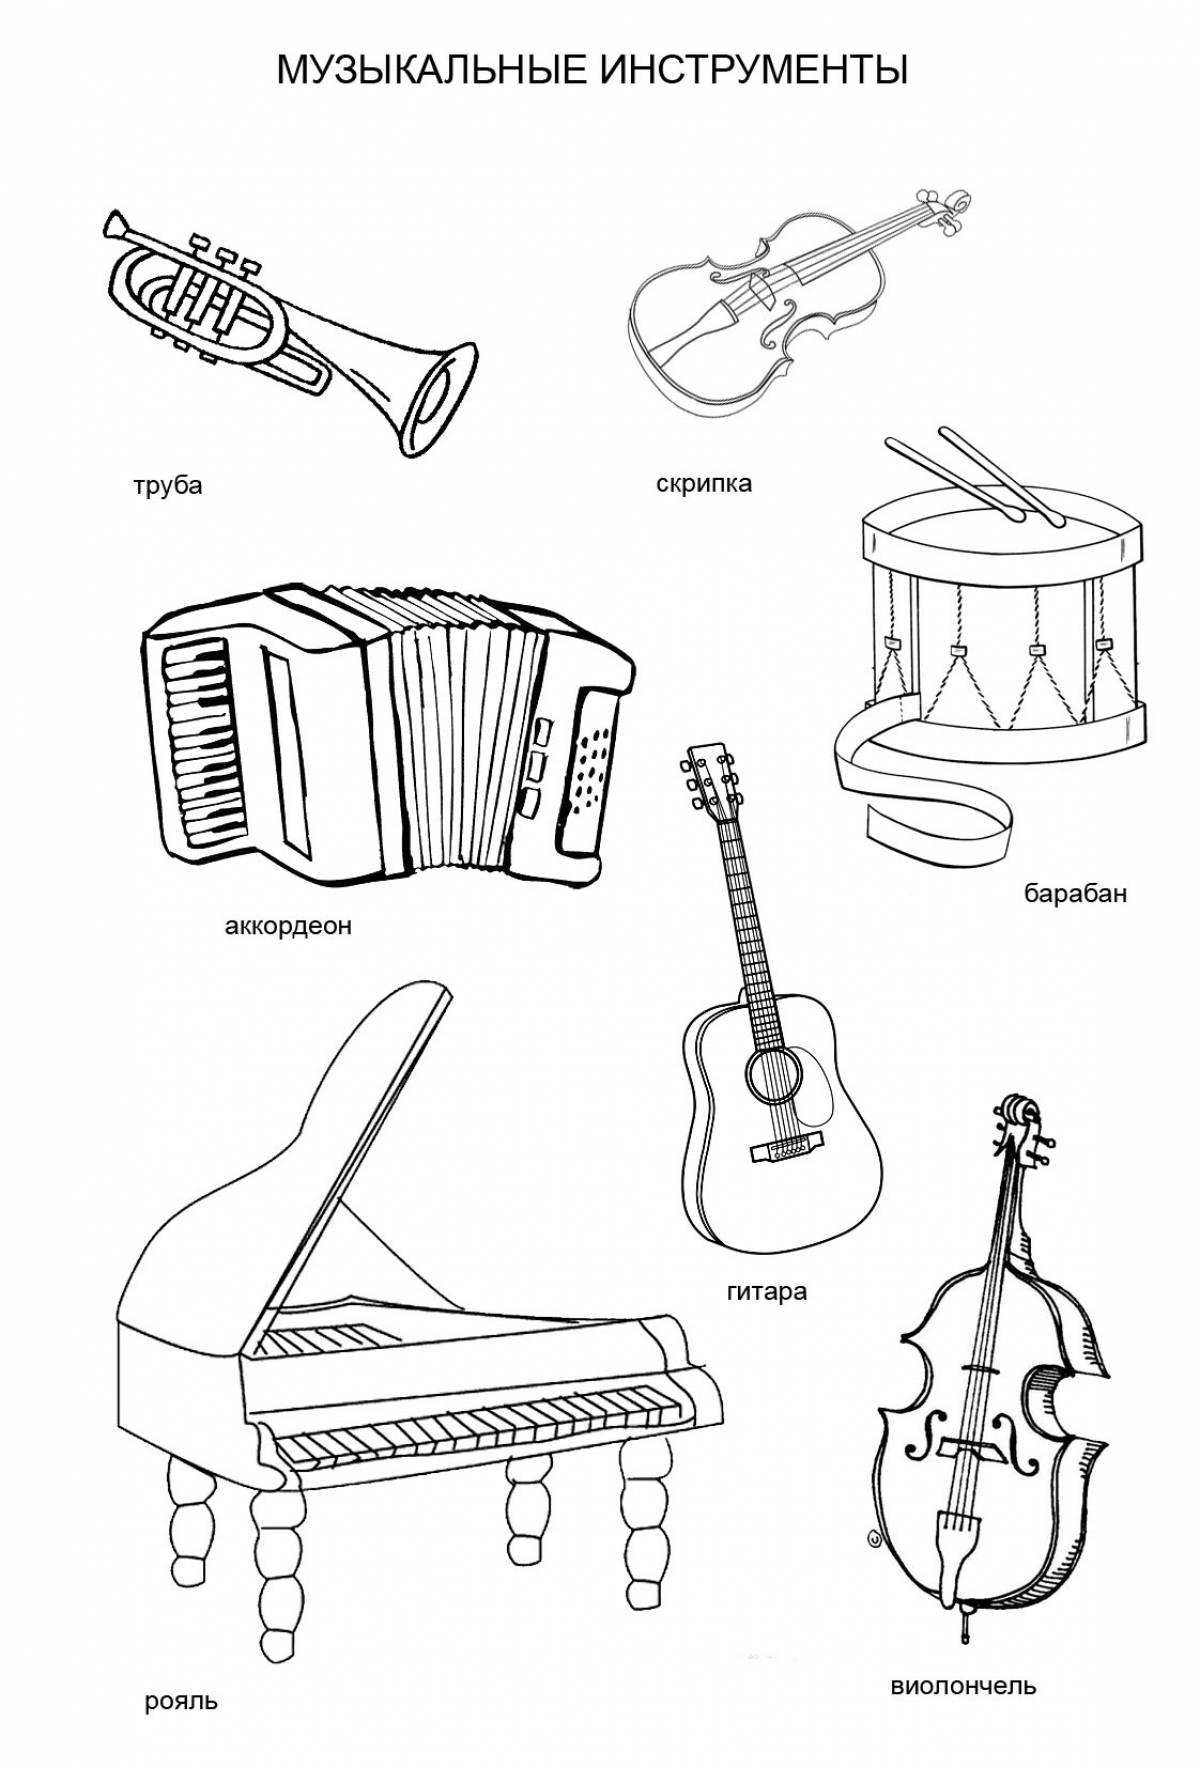 Photo Interesting, Musical instruments #2